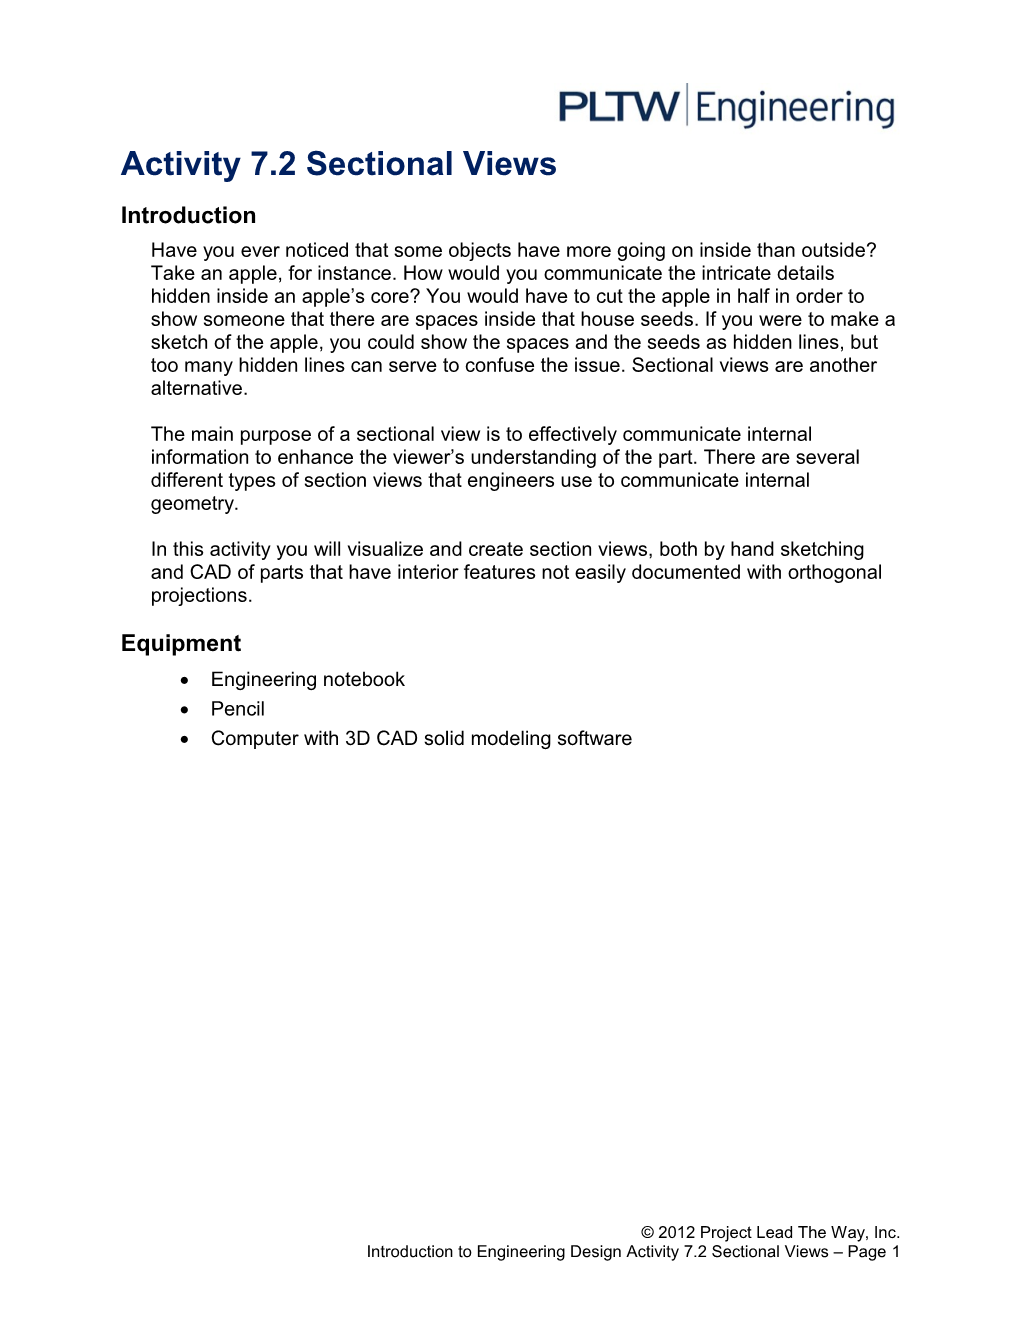 Activity 7.2 Sectional Views